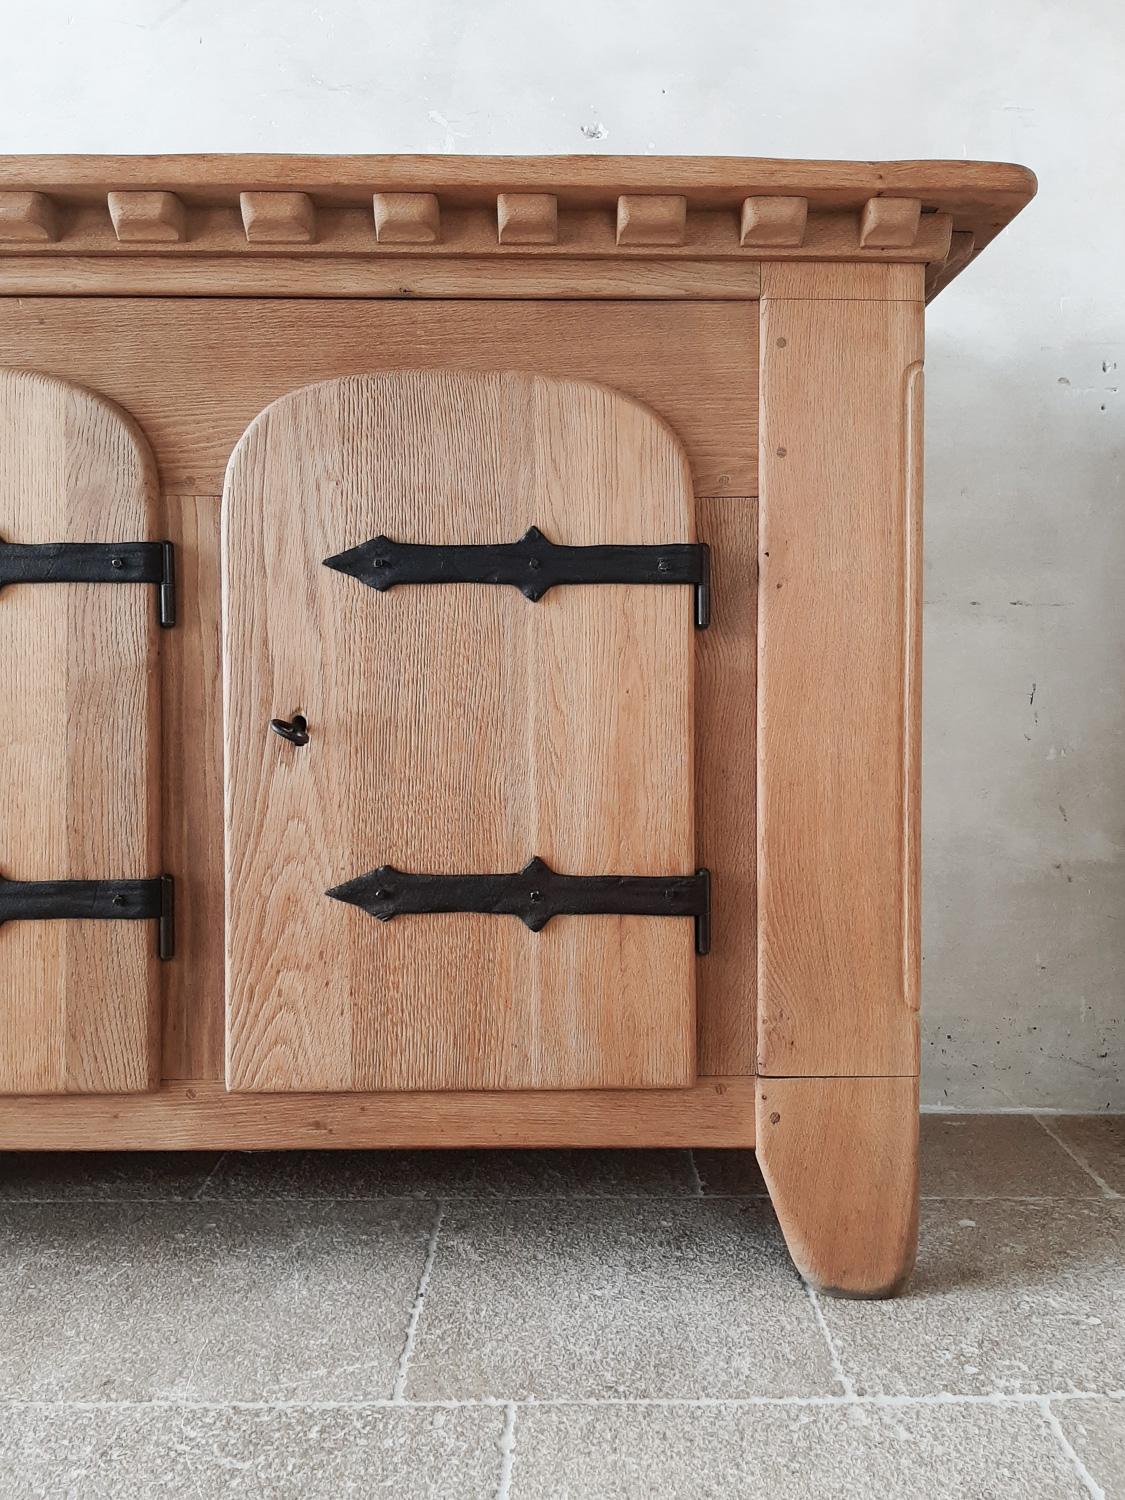 Wrought Iron Mid 20th Century Spanish Oak Credenza 1940s For Sale